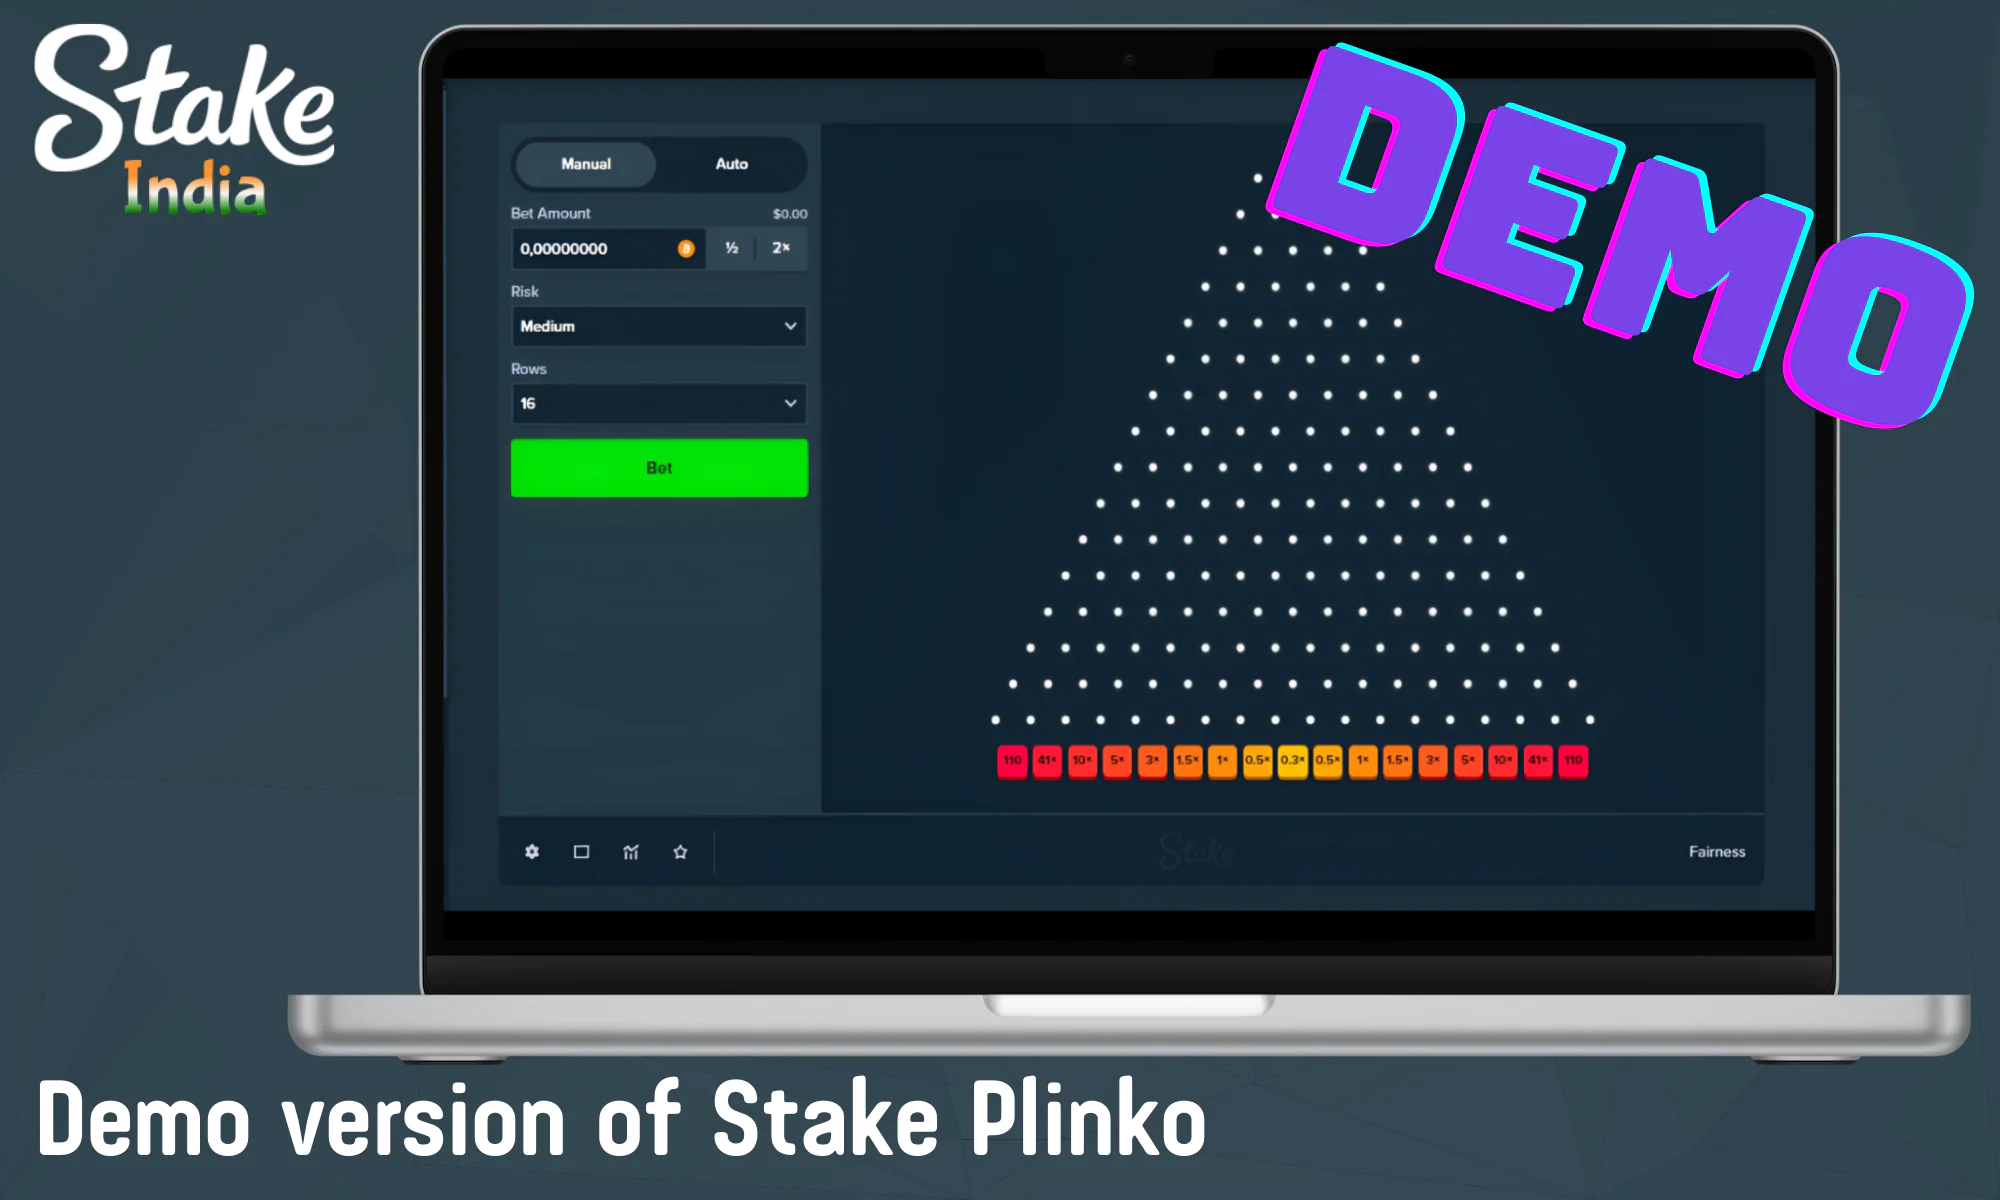 For those who want to try to play without depositing funds, a Demo version of Stake Plinko has been created